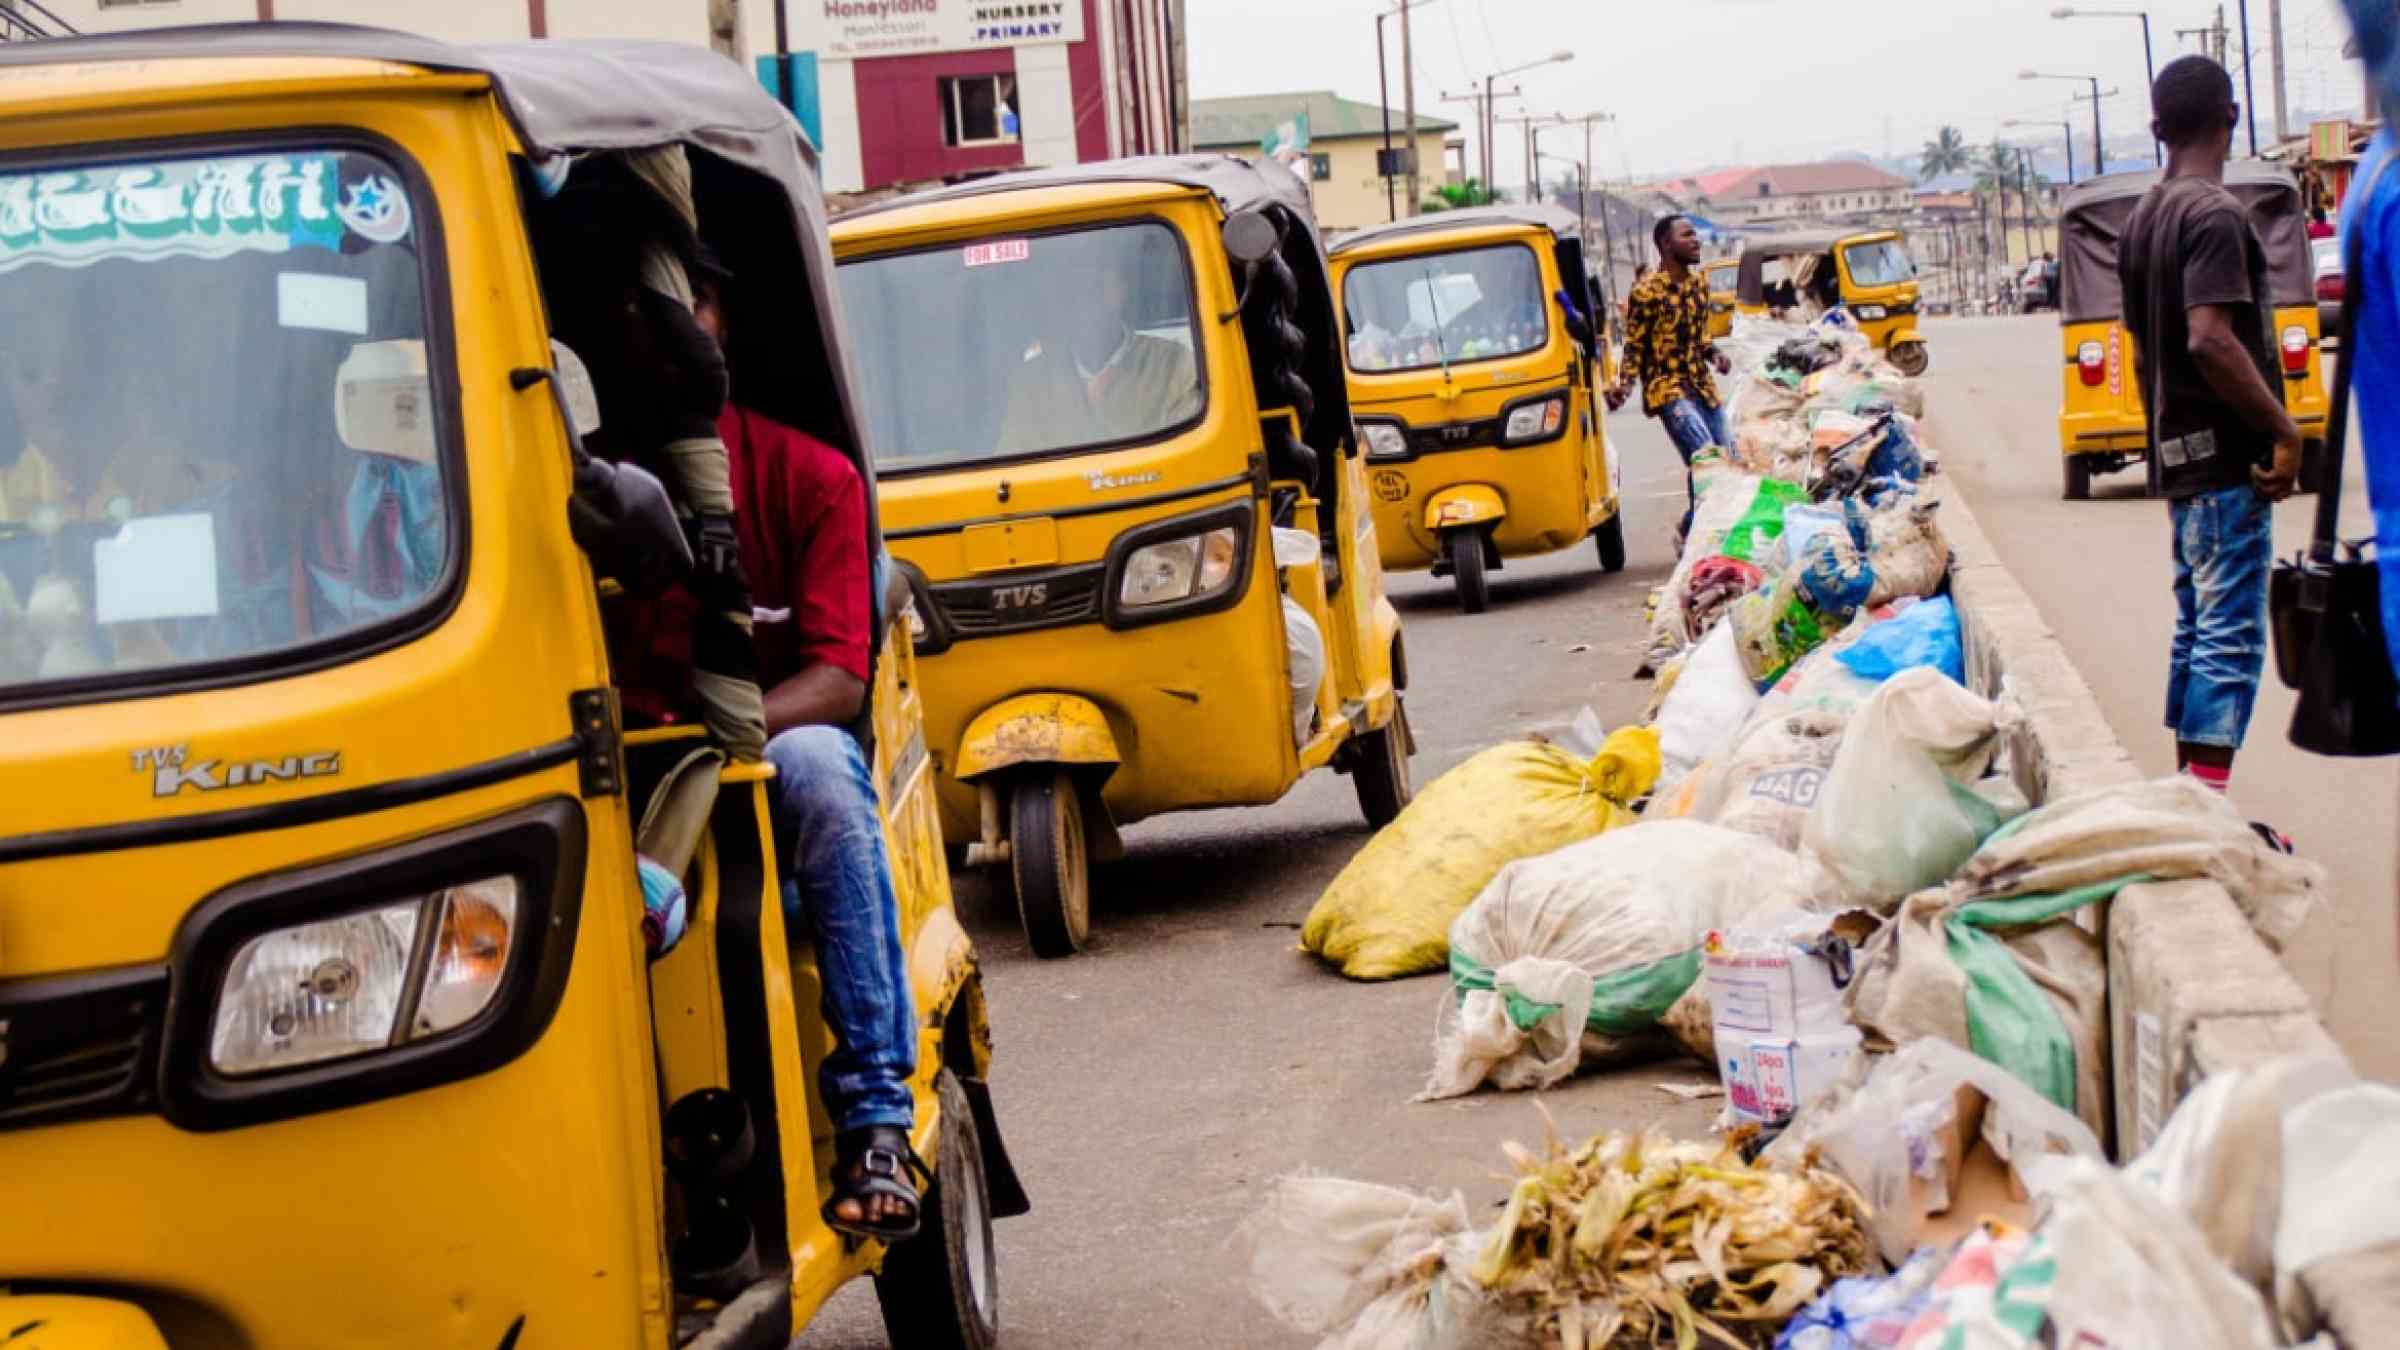 Waste laying on the streets in Nigeria. Yellow tricycles pass the waste along the road.